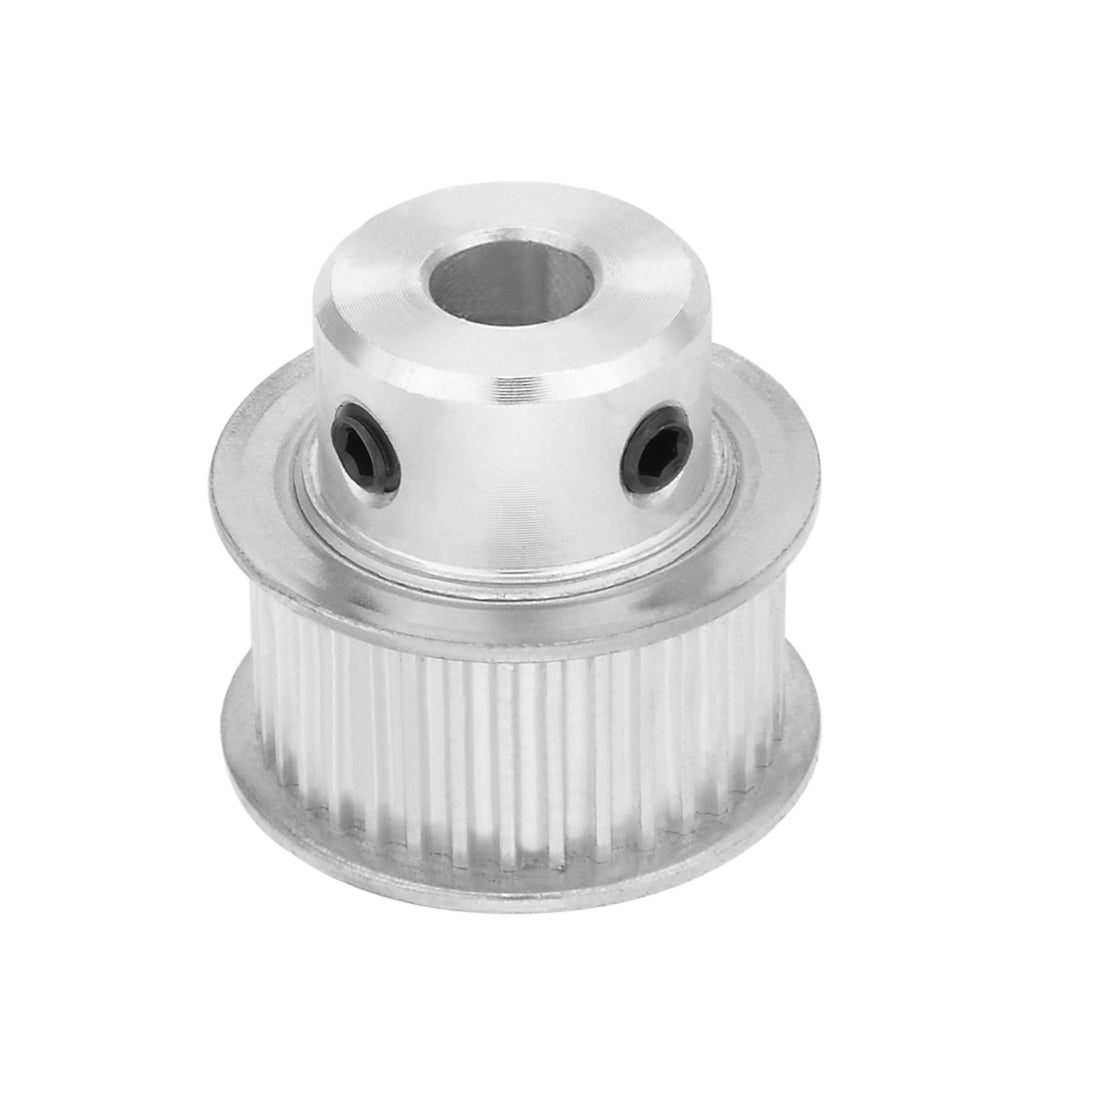 uxcell Uxcell Aluminum  35 Teeth 6.35mm Bore Timing Belt Idler Pulley Synchronous Wheel 10mm Belt for 3D Printer CNC